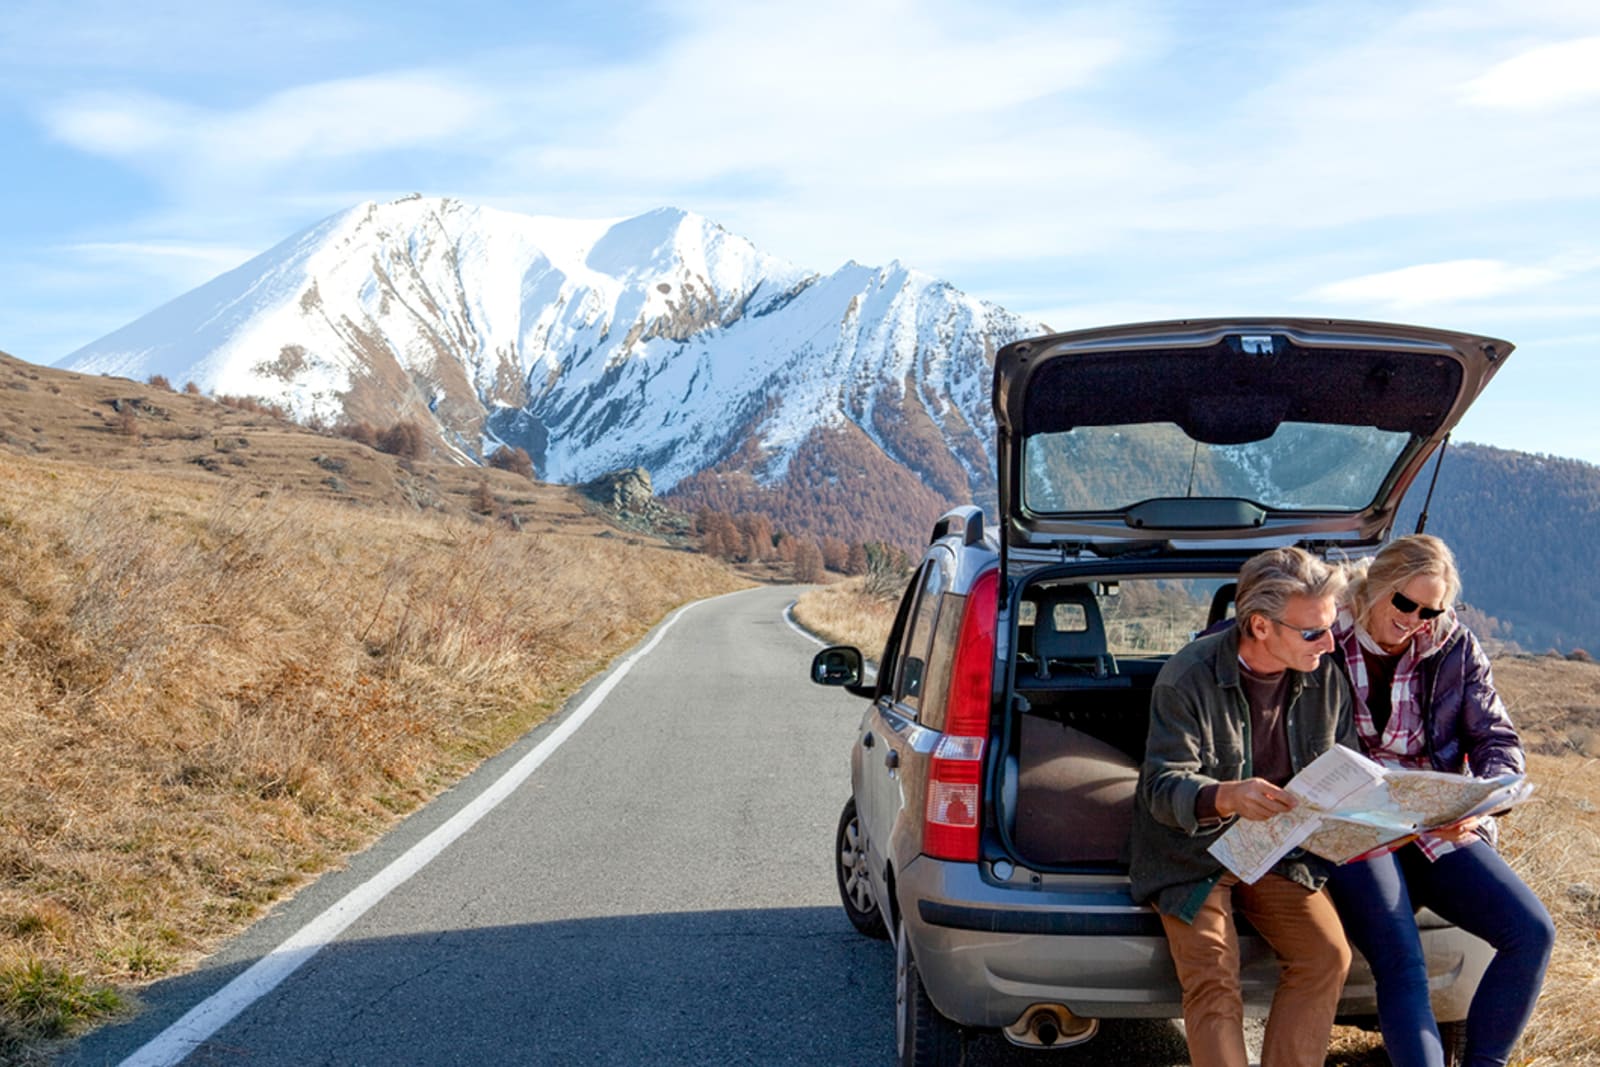 A couple checking a paper map for directions while on a road trip